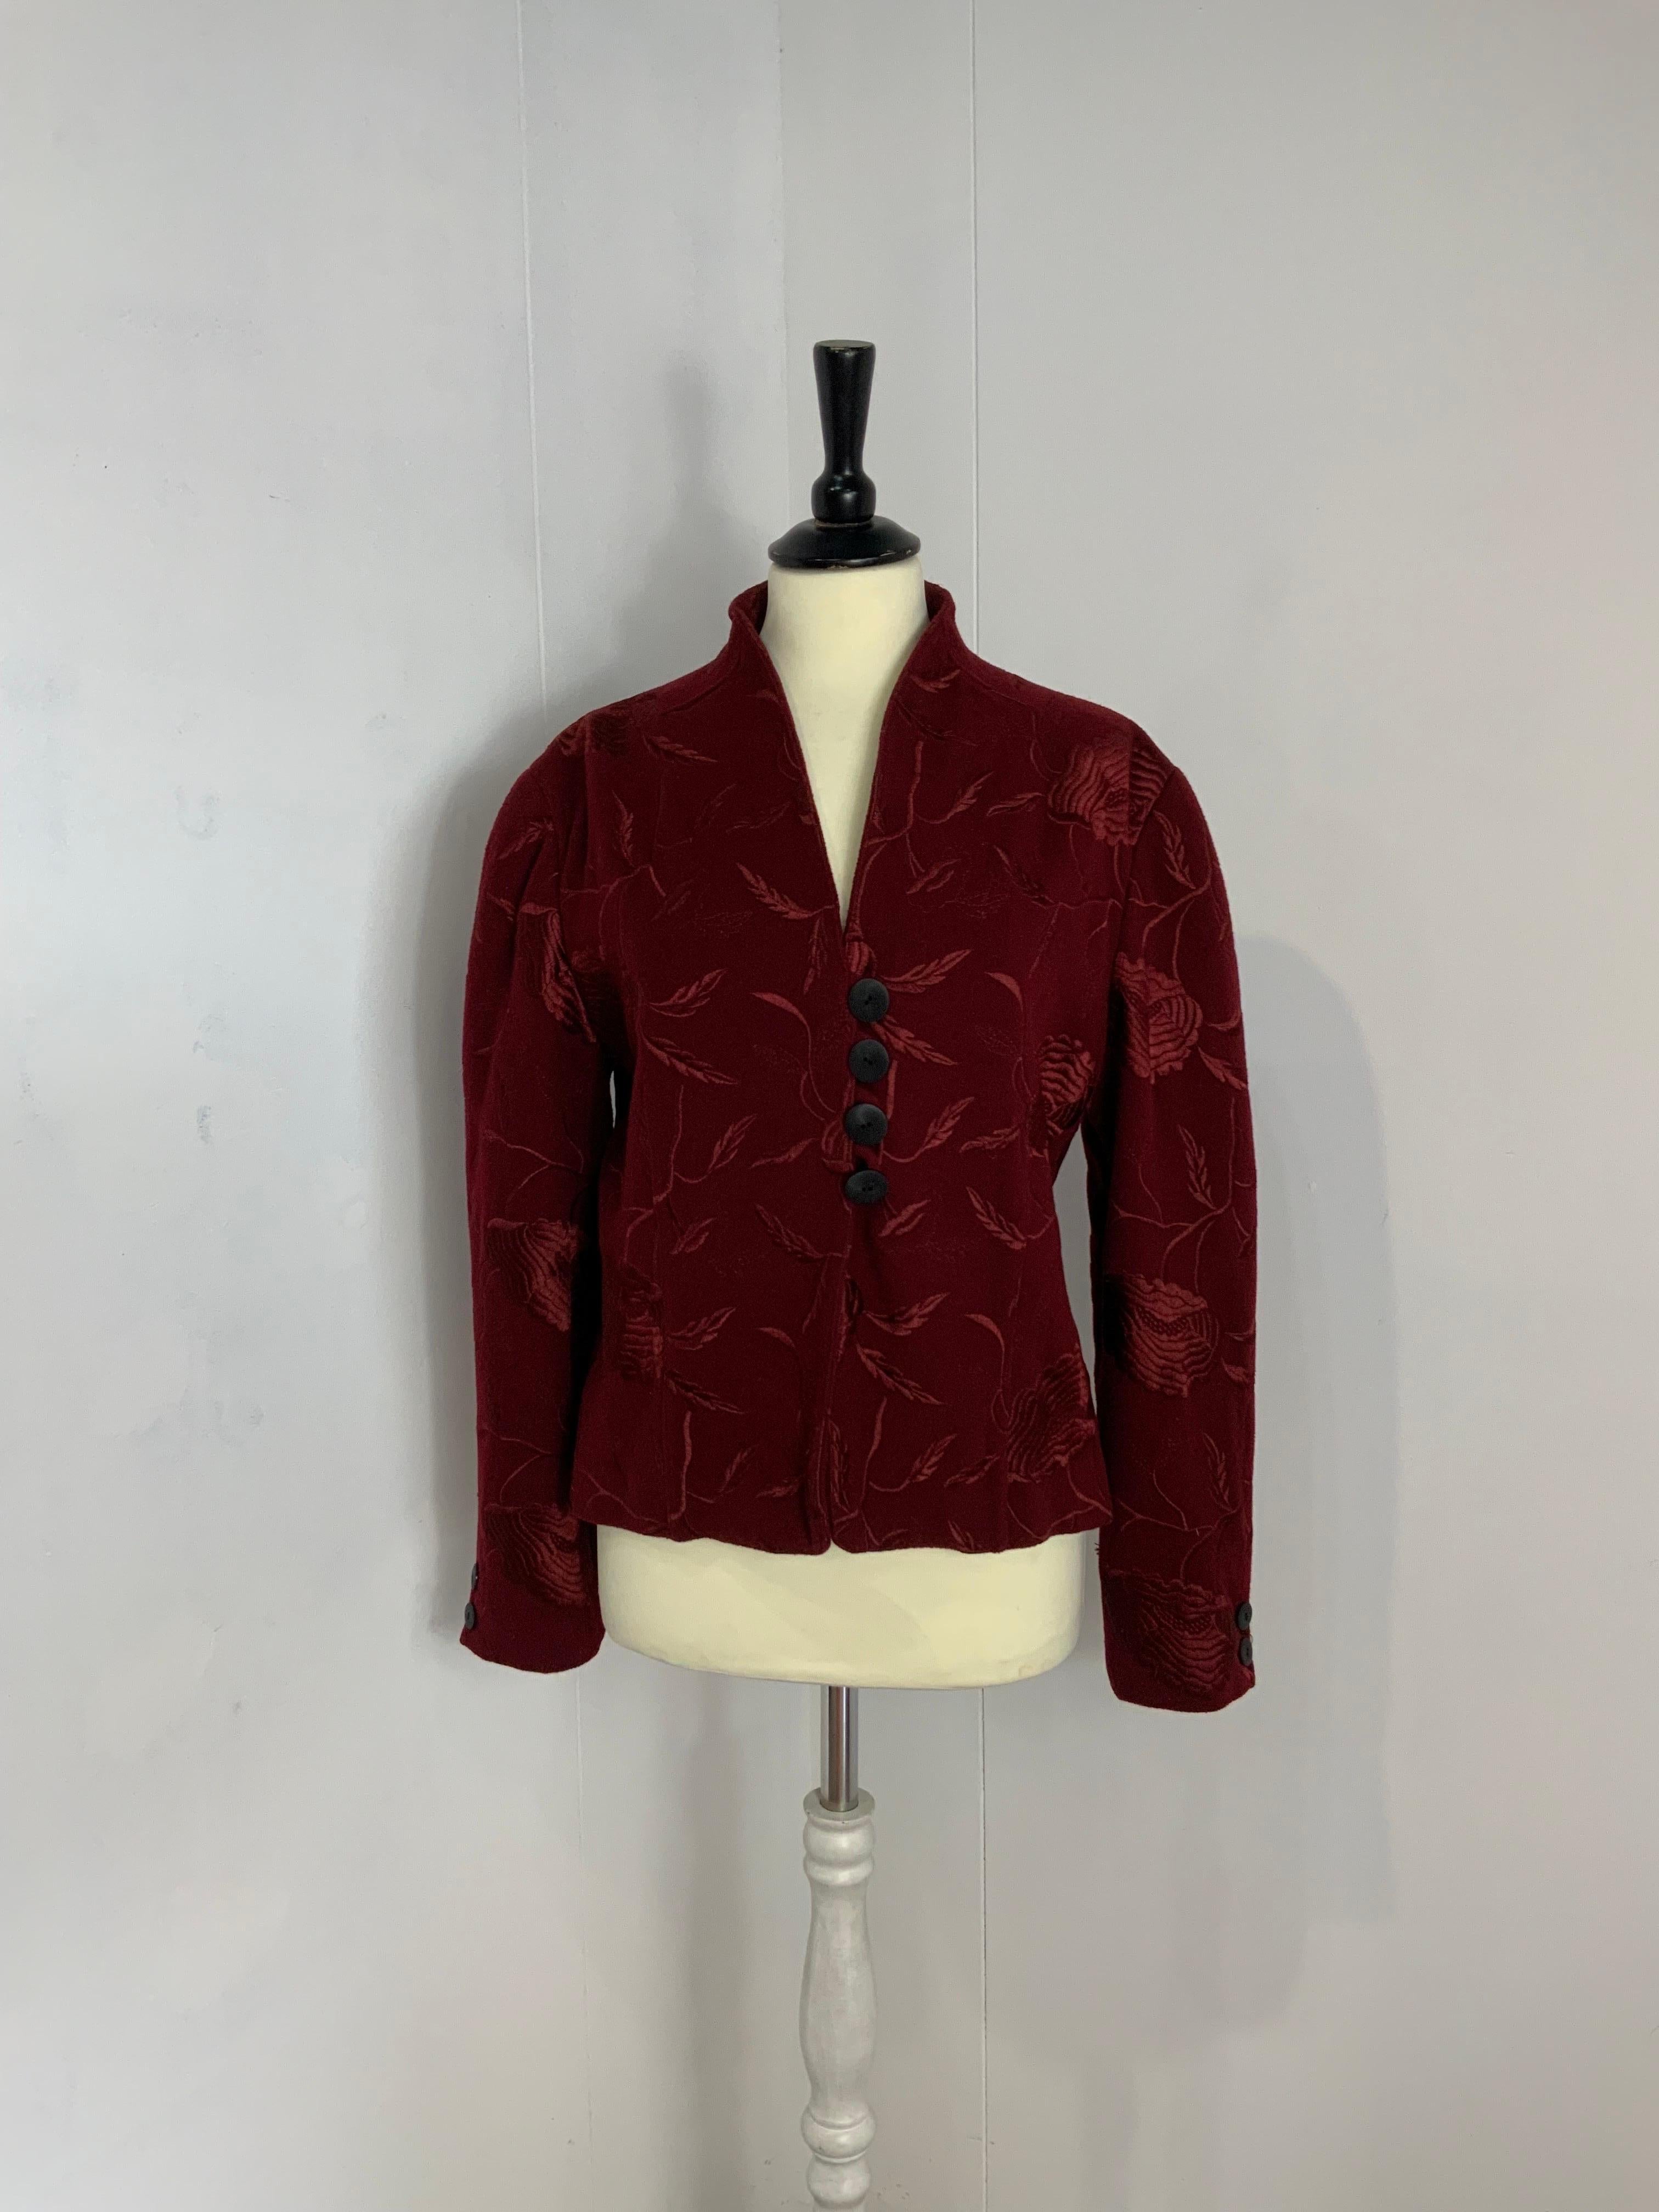 Krizia vintage jacket.
In wool, viscose, nylon and cashmere.
Beautiful floral embroidery.
Italian size 44
Shoulders 46 cm
Bust 48 cm
Length 58 cm
Excellent general condition, it shows signs of normal use and some pulled threads.